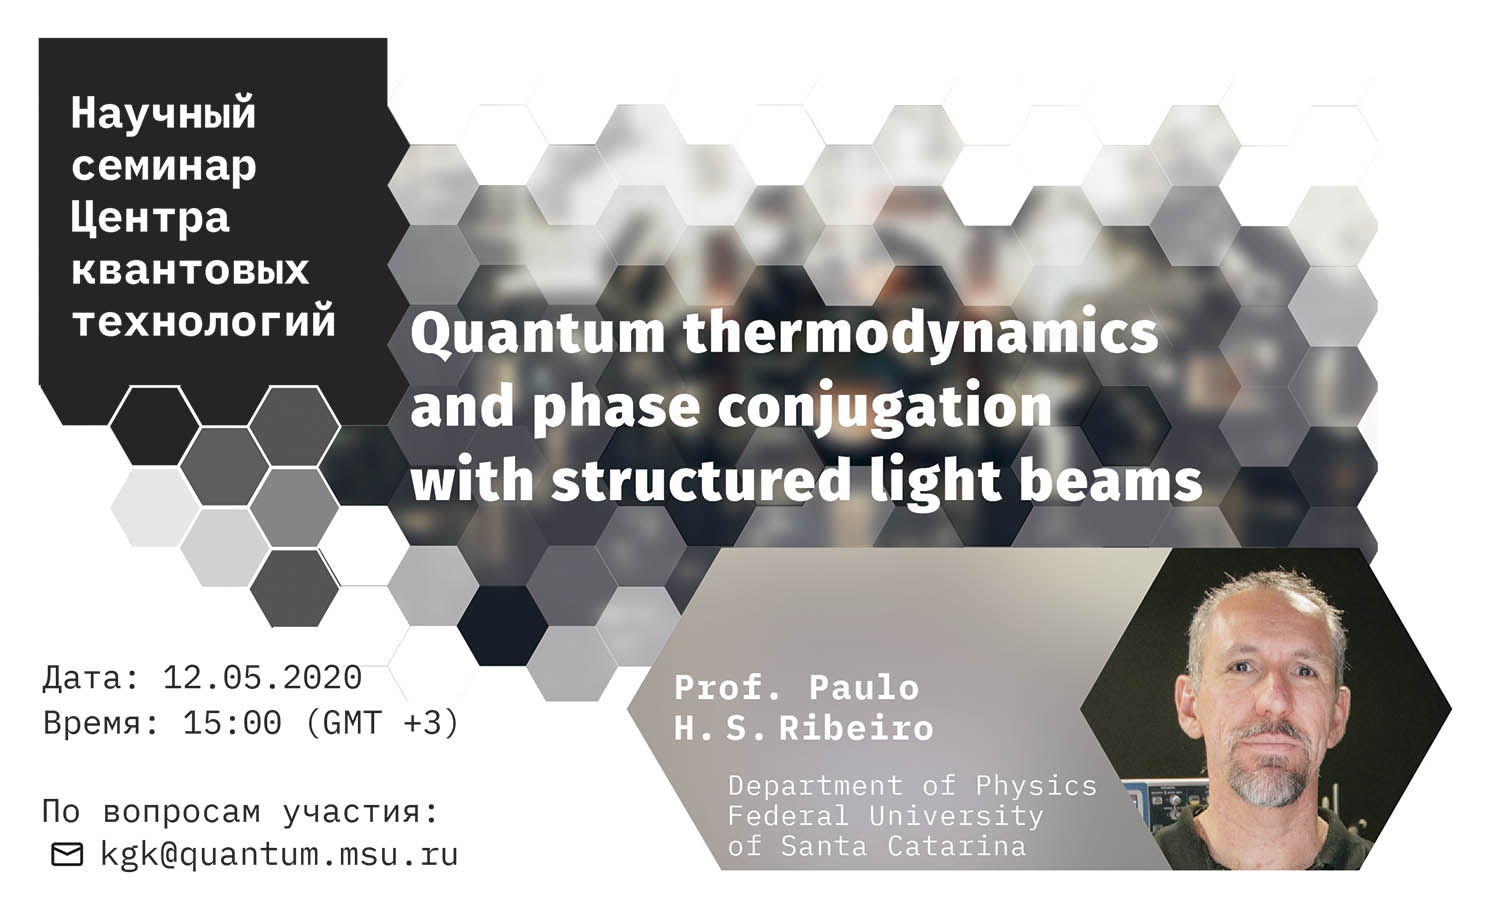 Paulo Henrique Souto Ribeiro — Quantum Thermodynamics and phase conjugation with structured light beams